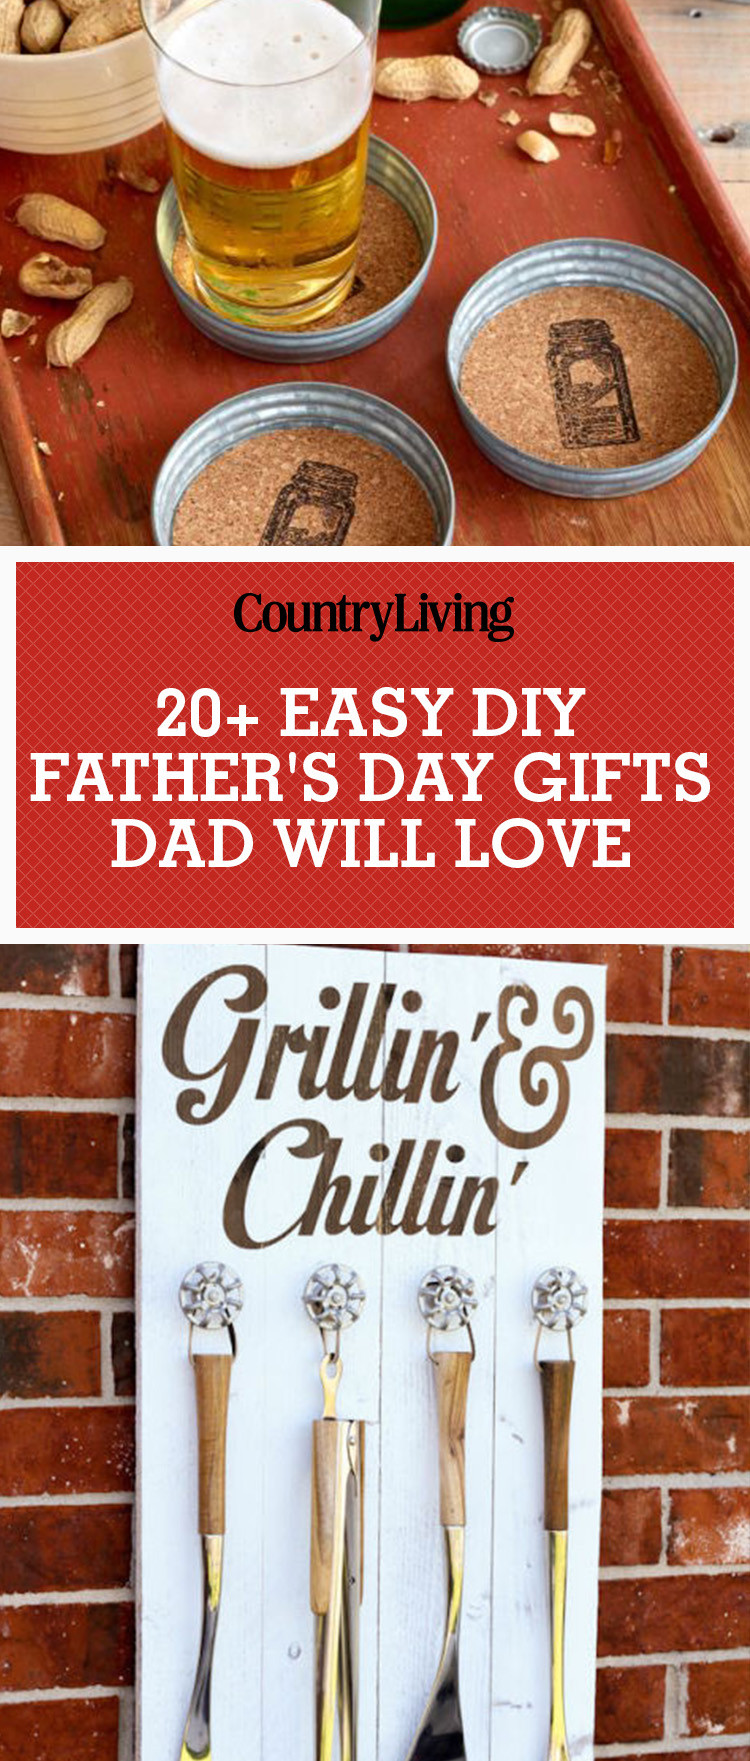 Fathers Day Gift Ideas Crafts
 25 DIY Fathers Day Gifts & Crafts Homemade Ideas for